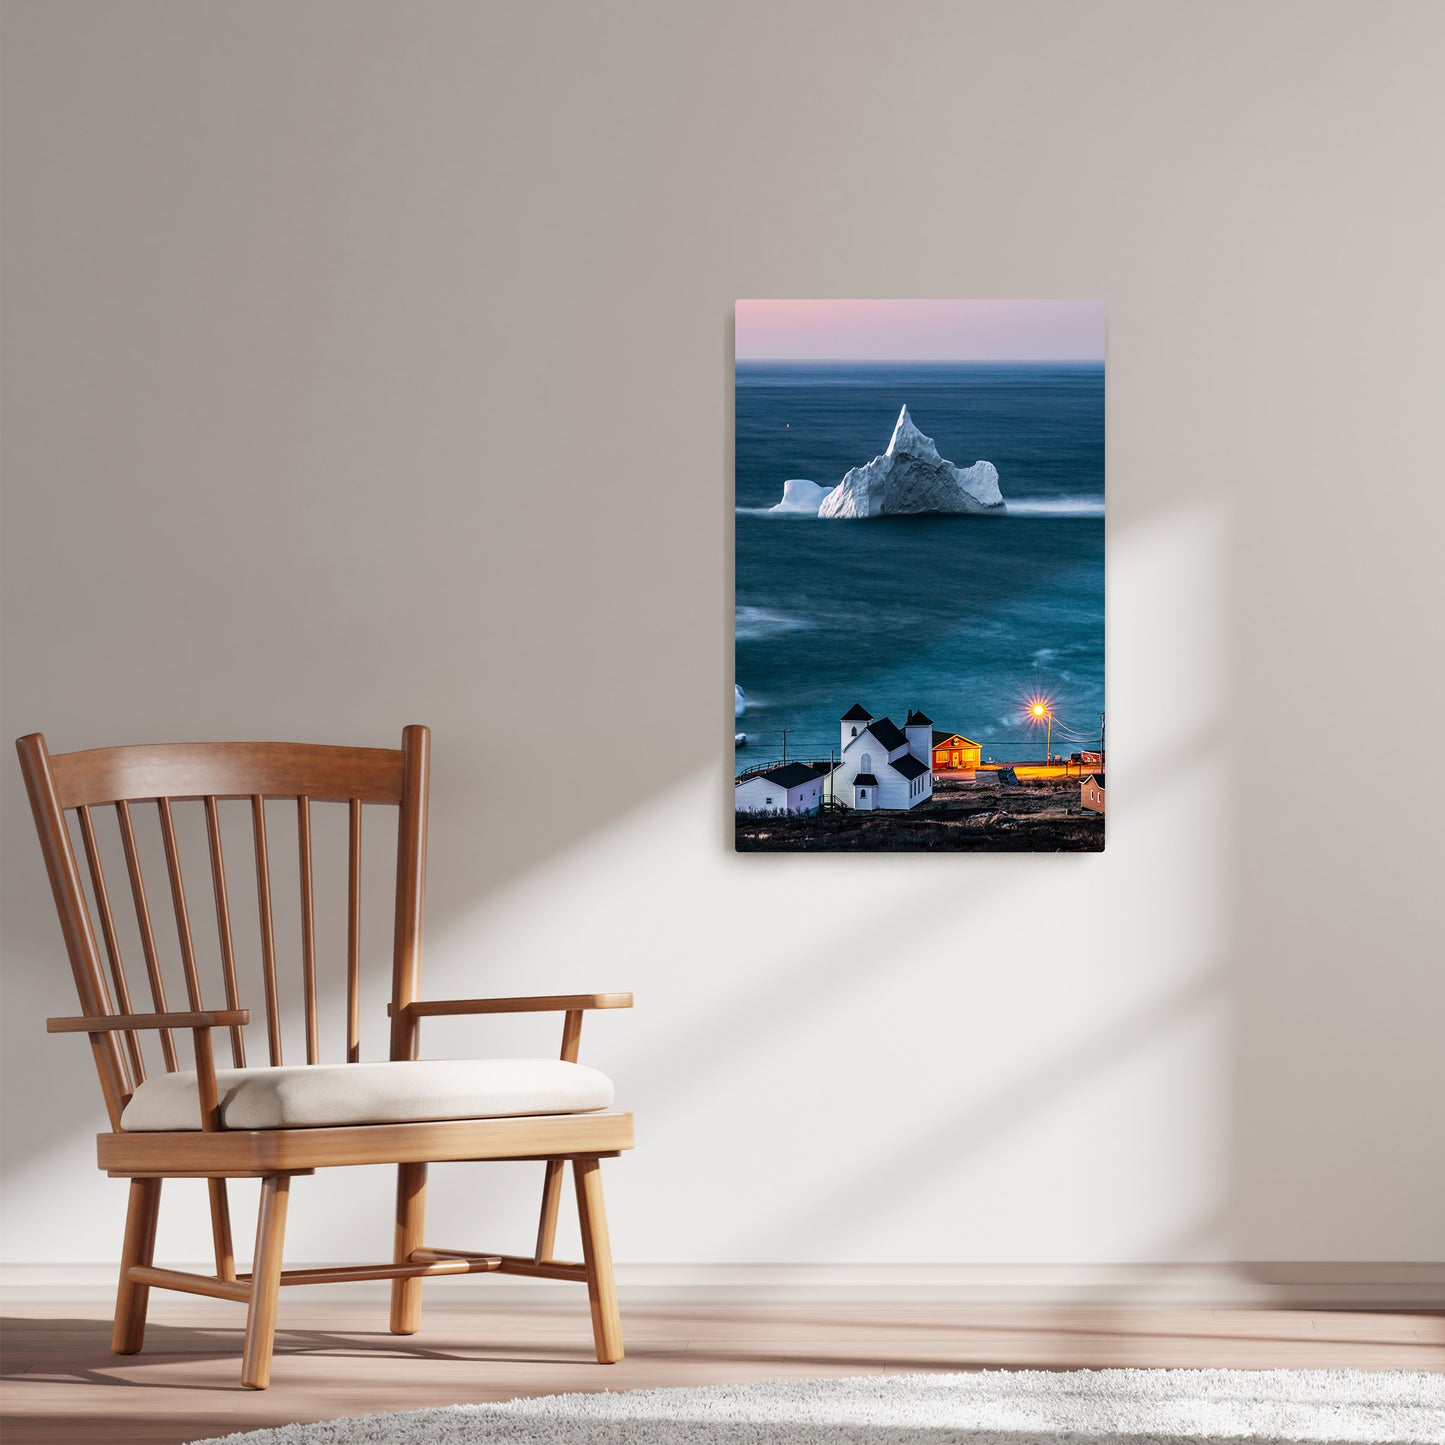 Ray Mackey's Grates Cove photography reproduced on HD metal print and displayed on wall